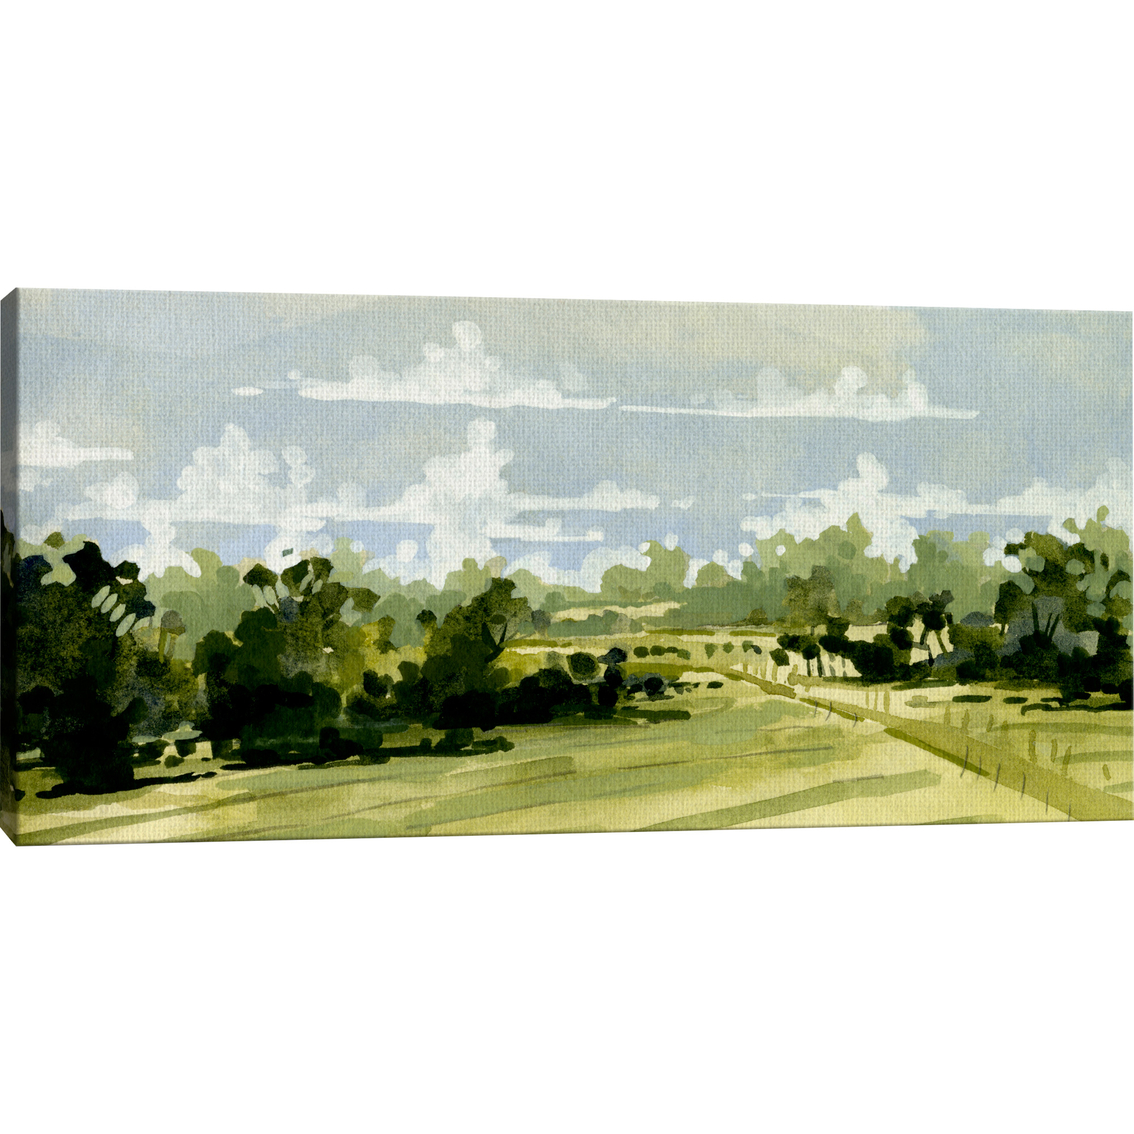 Inkstry Green Gardens III Canvas Wrapped Giclee Art - Image 2 of 3